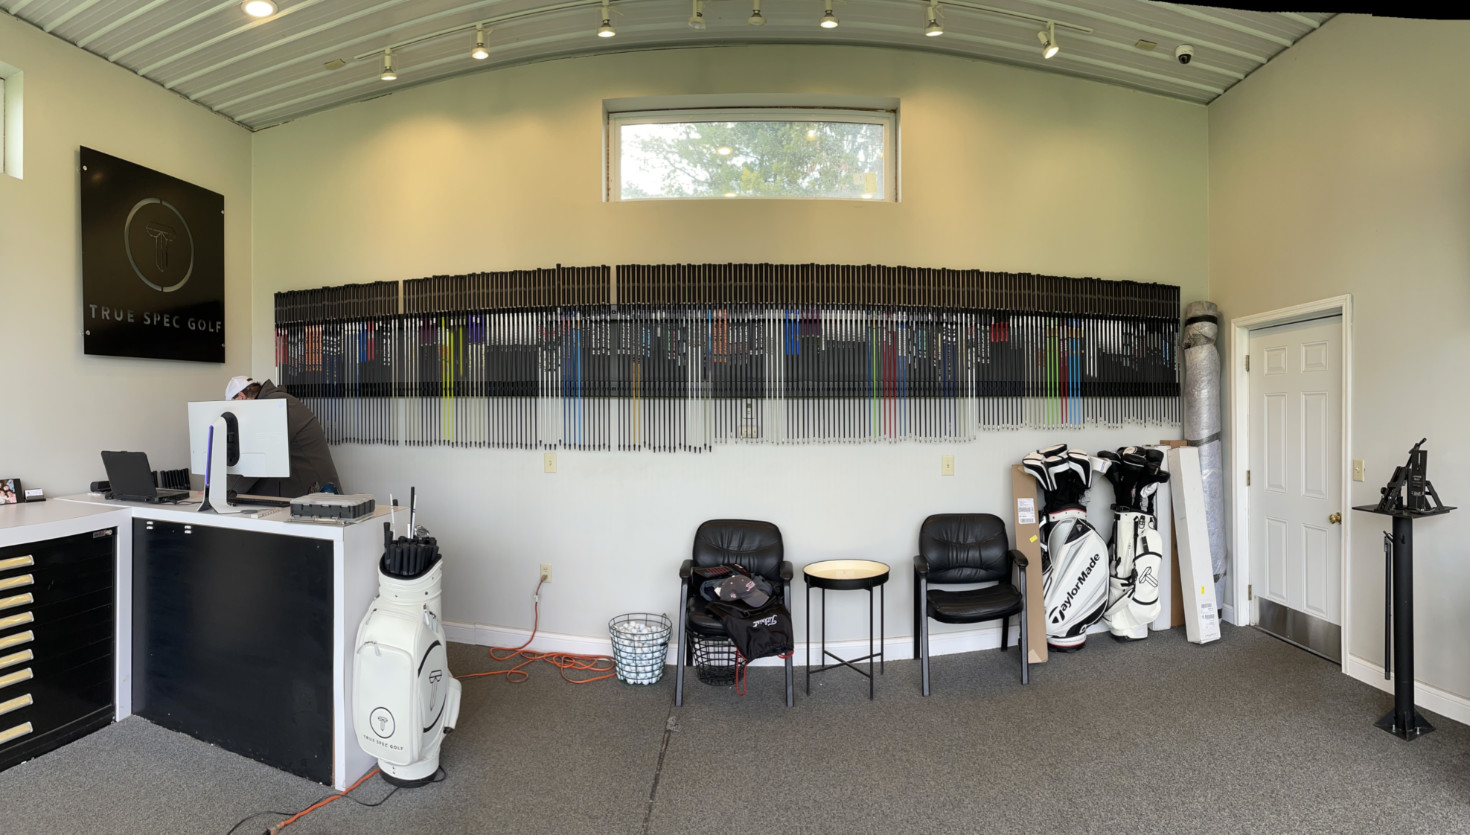 True Spec Golf features a plethora of club head and shaft combinations.